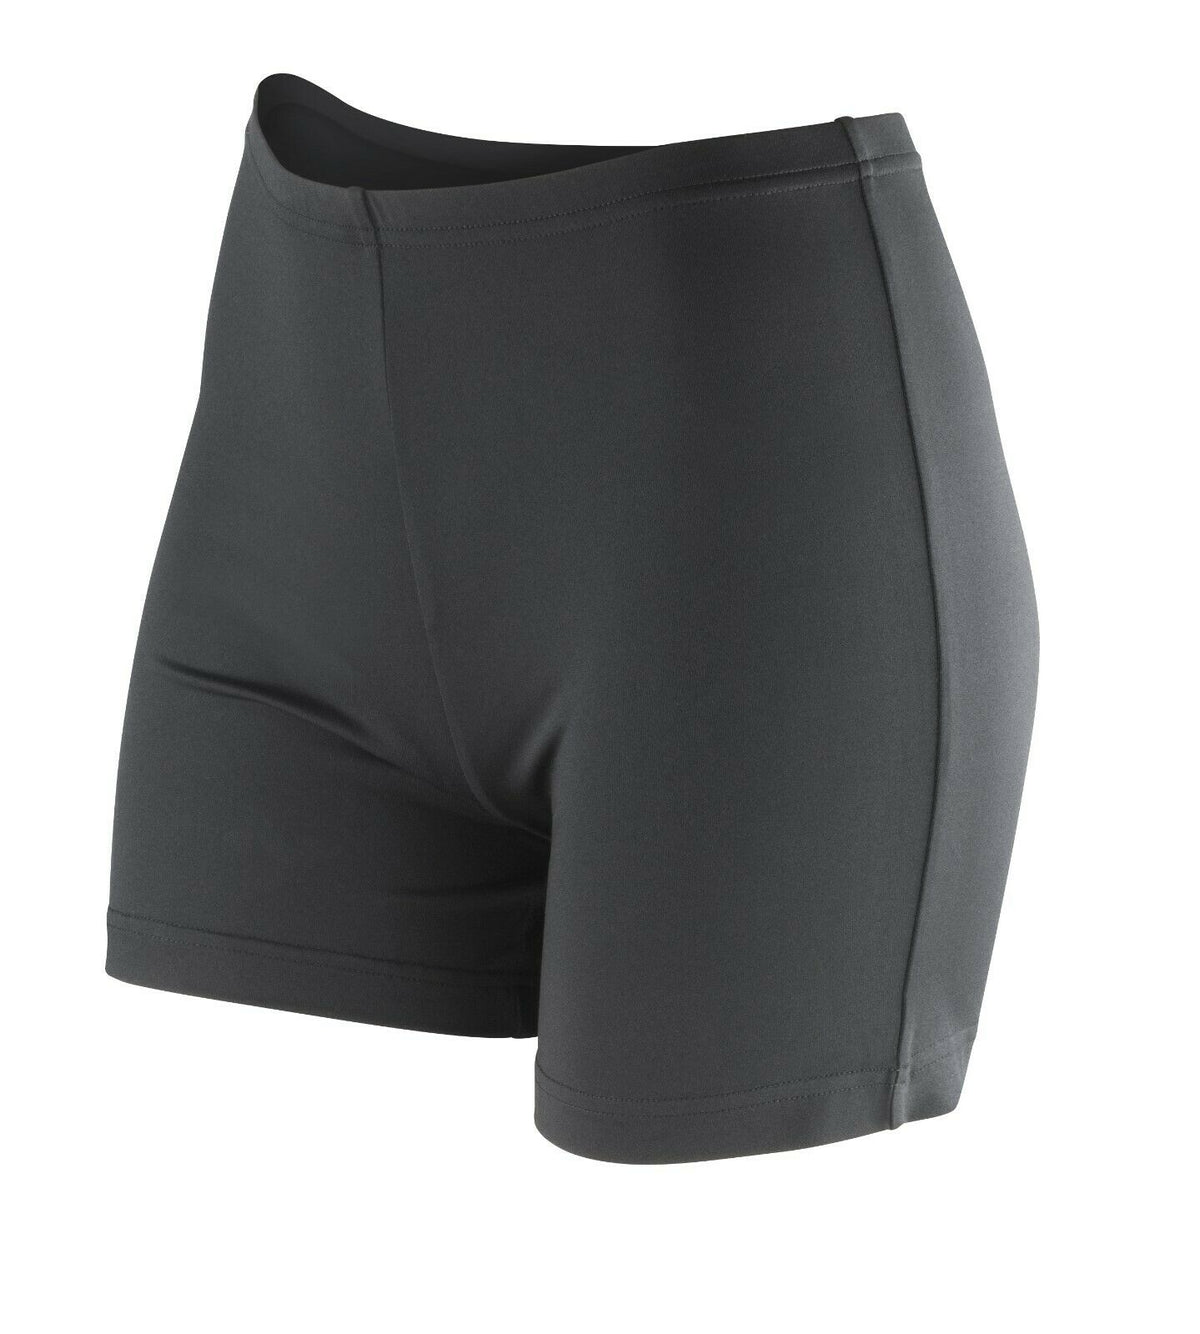 LADIES CYCLING FITNESS SOFTEX IMPACT SHORTS CASUAL WEAR & GYM RUNNING LEGGINGS - Hamtons Direct